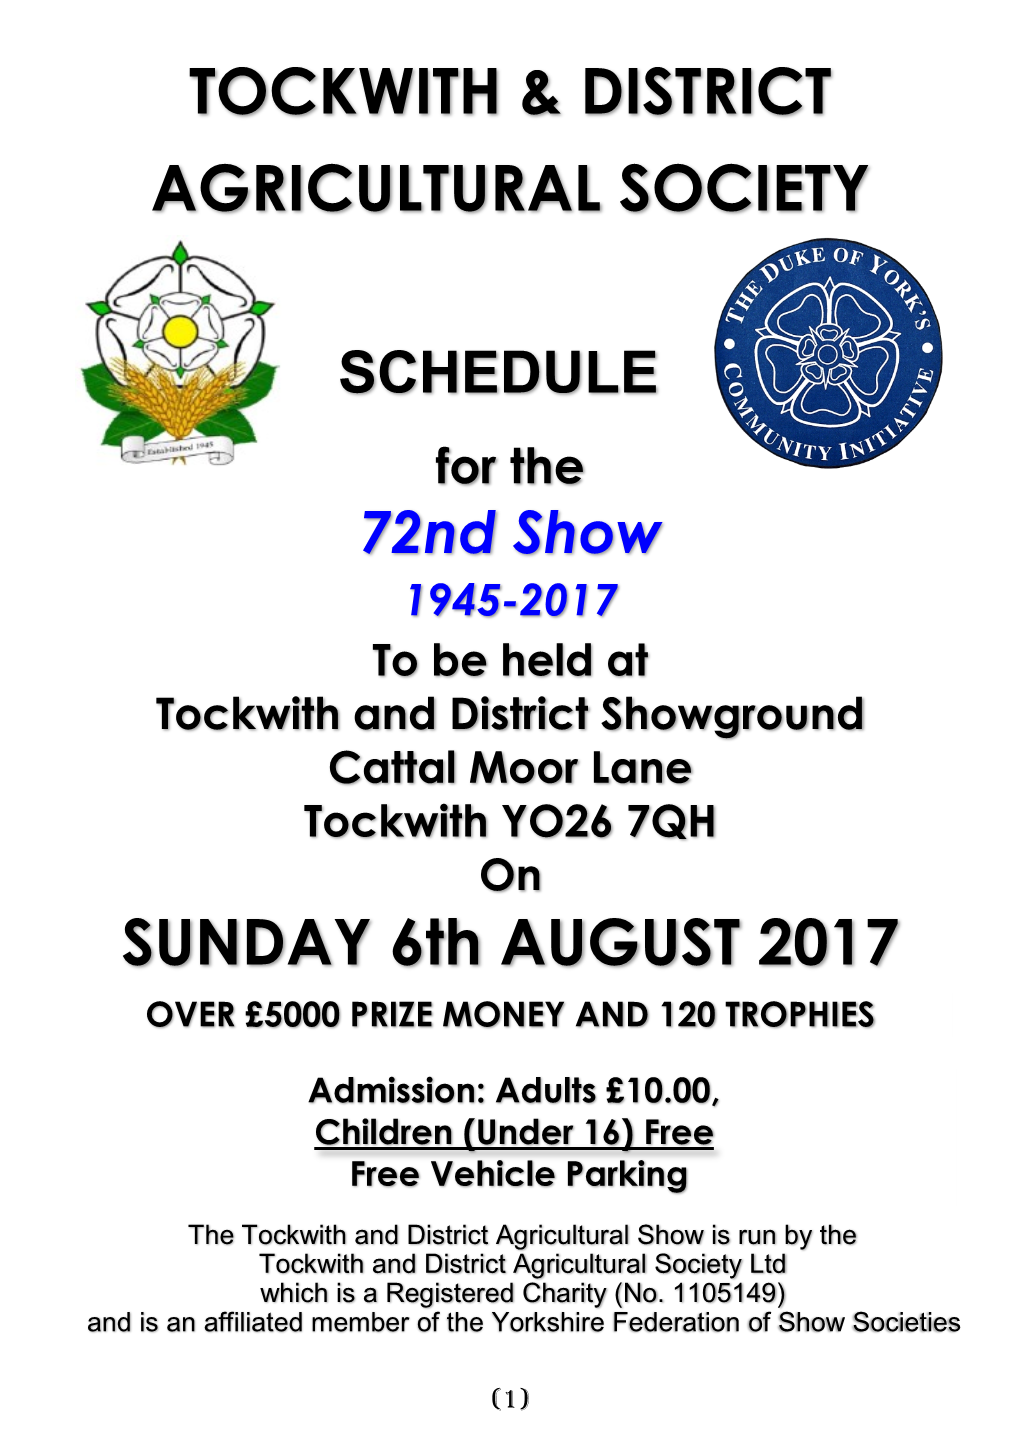 TOCKWITH & DISTRICT AGRICULTURAL SOCIETY SUNDAY 6Th AUGUST 2017